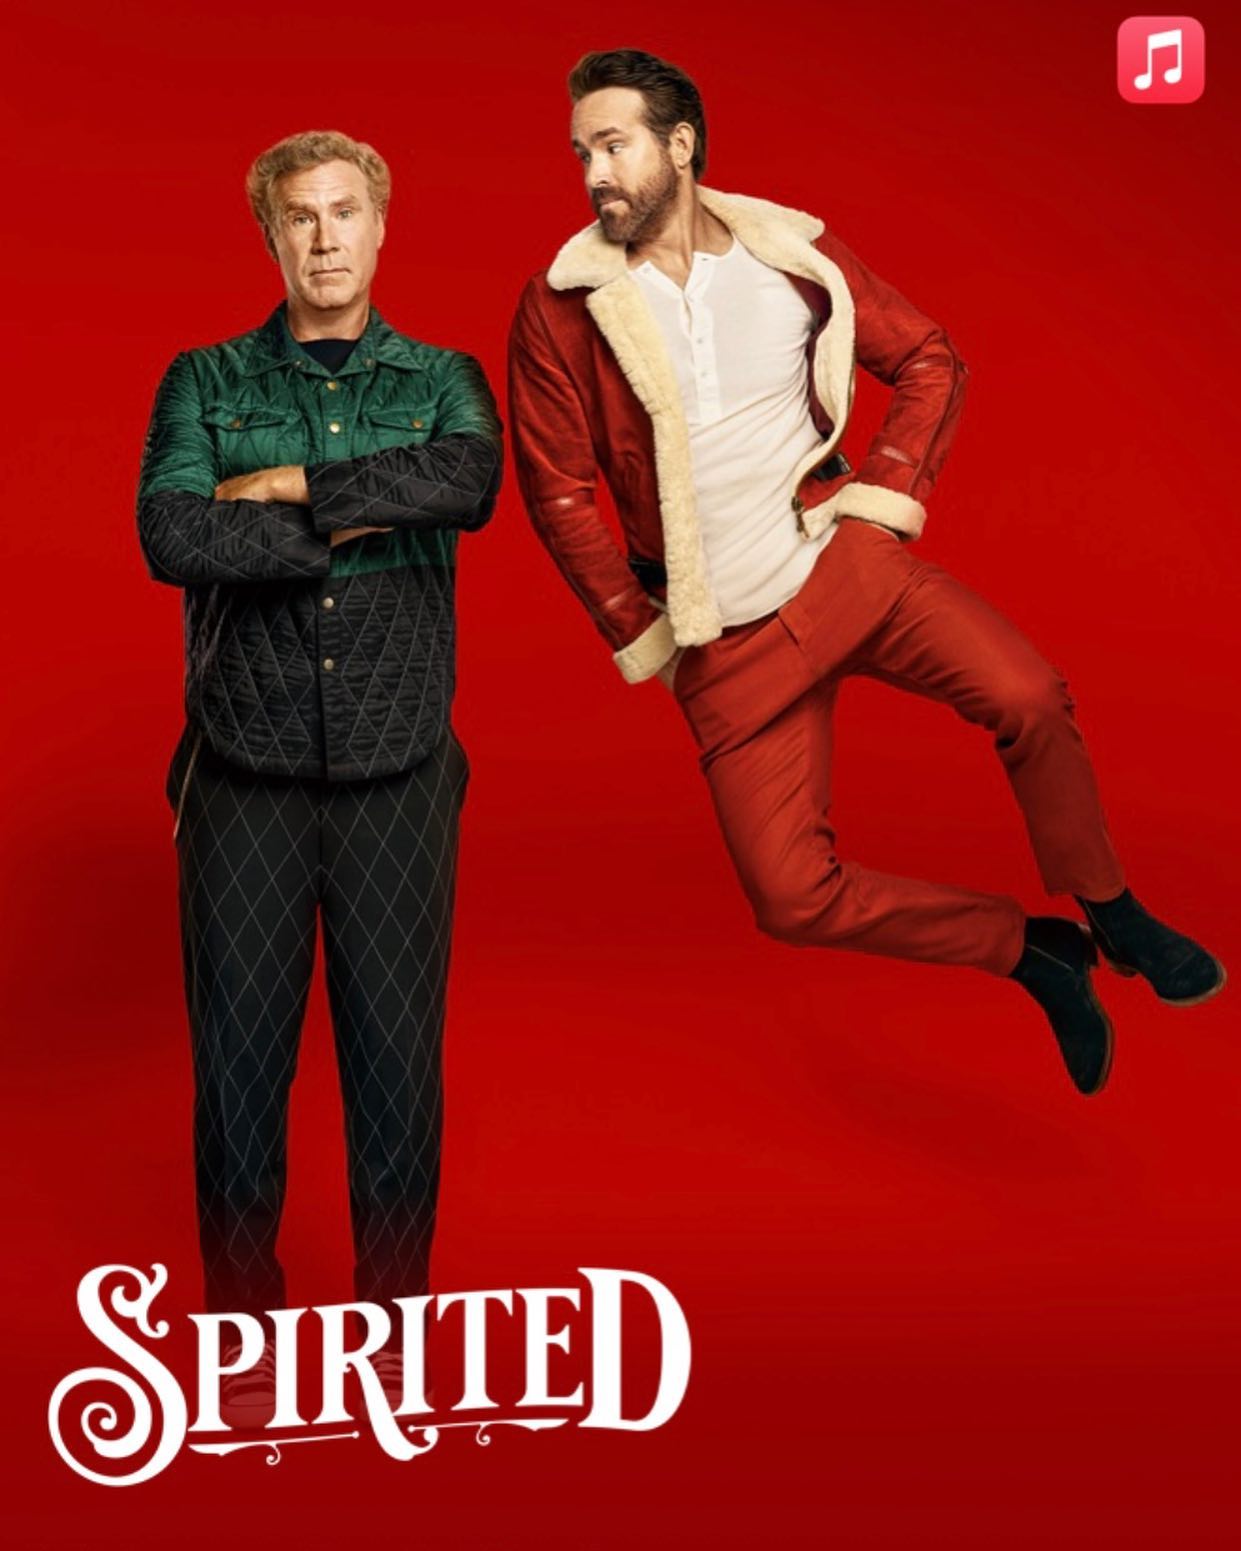 Thank you @vancityreynolds and @octaviaspencer for the perfect Saturday night movie and kick off to the season! #spirited